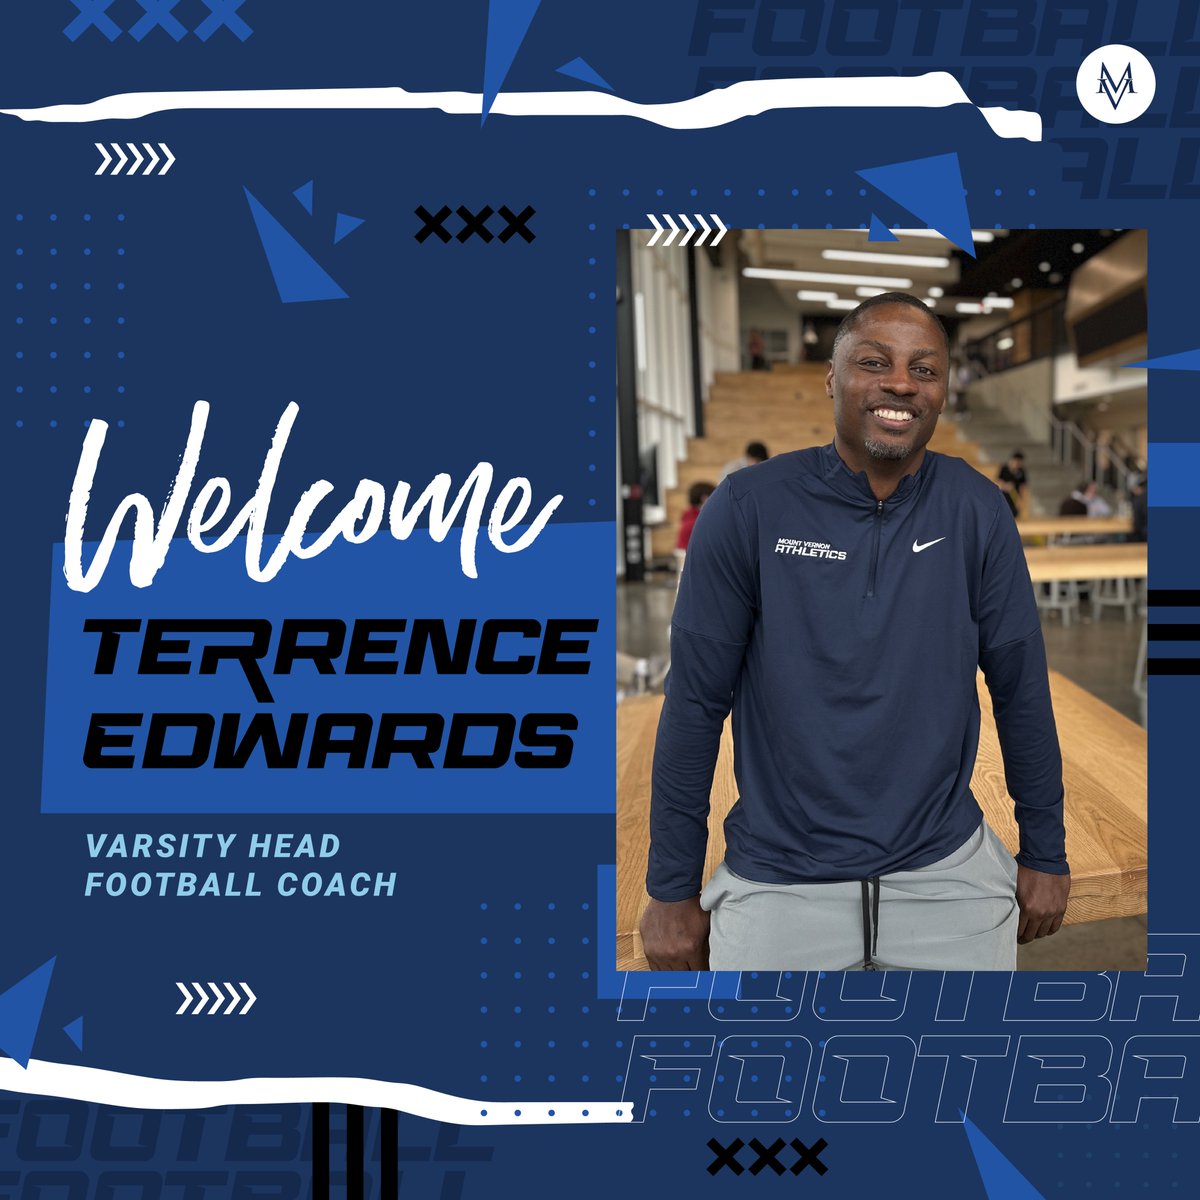 🏈 Exciting news at Mount Vernon! Introducing our new Varsity Head Football Coach, Terrence Edwards! 🌟 From UGA record-breaker to coaching maestro, Coach Edwards brings a legacy of excellence. 🏆 Read more here: mountvernonschool.org/mount-vernon-s…